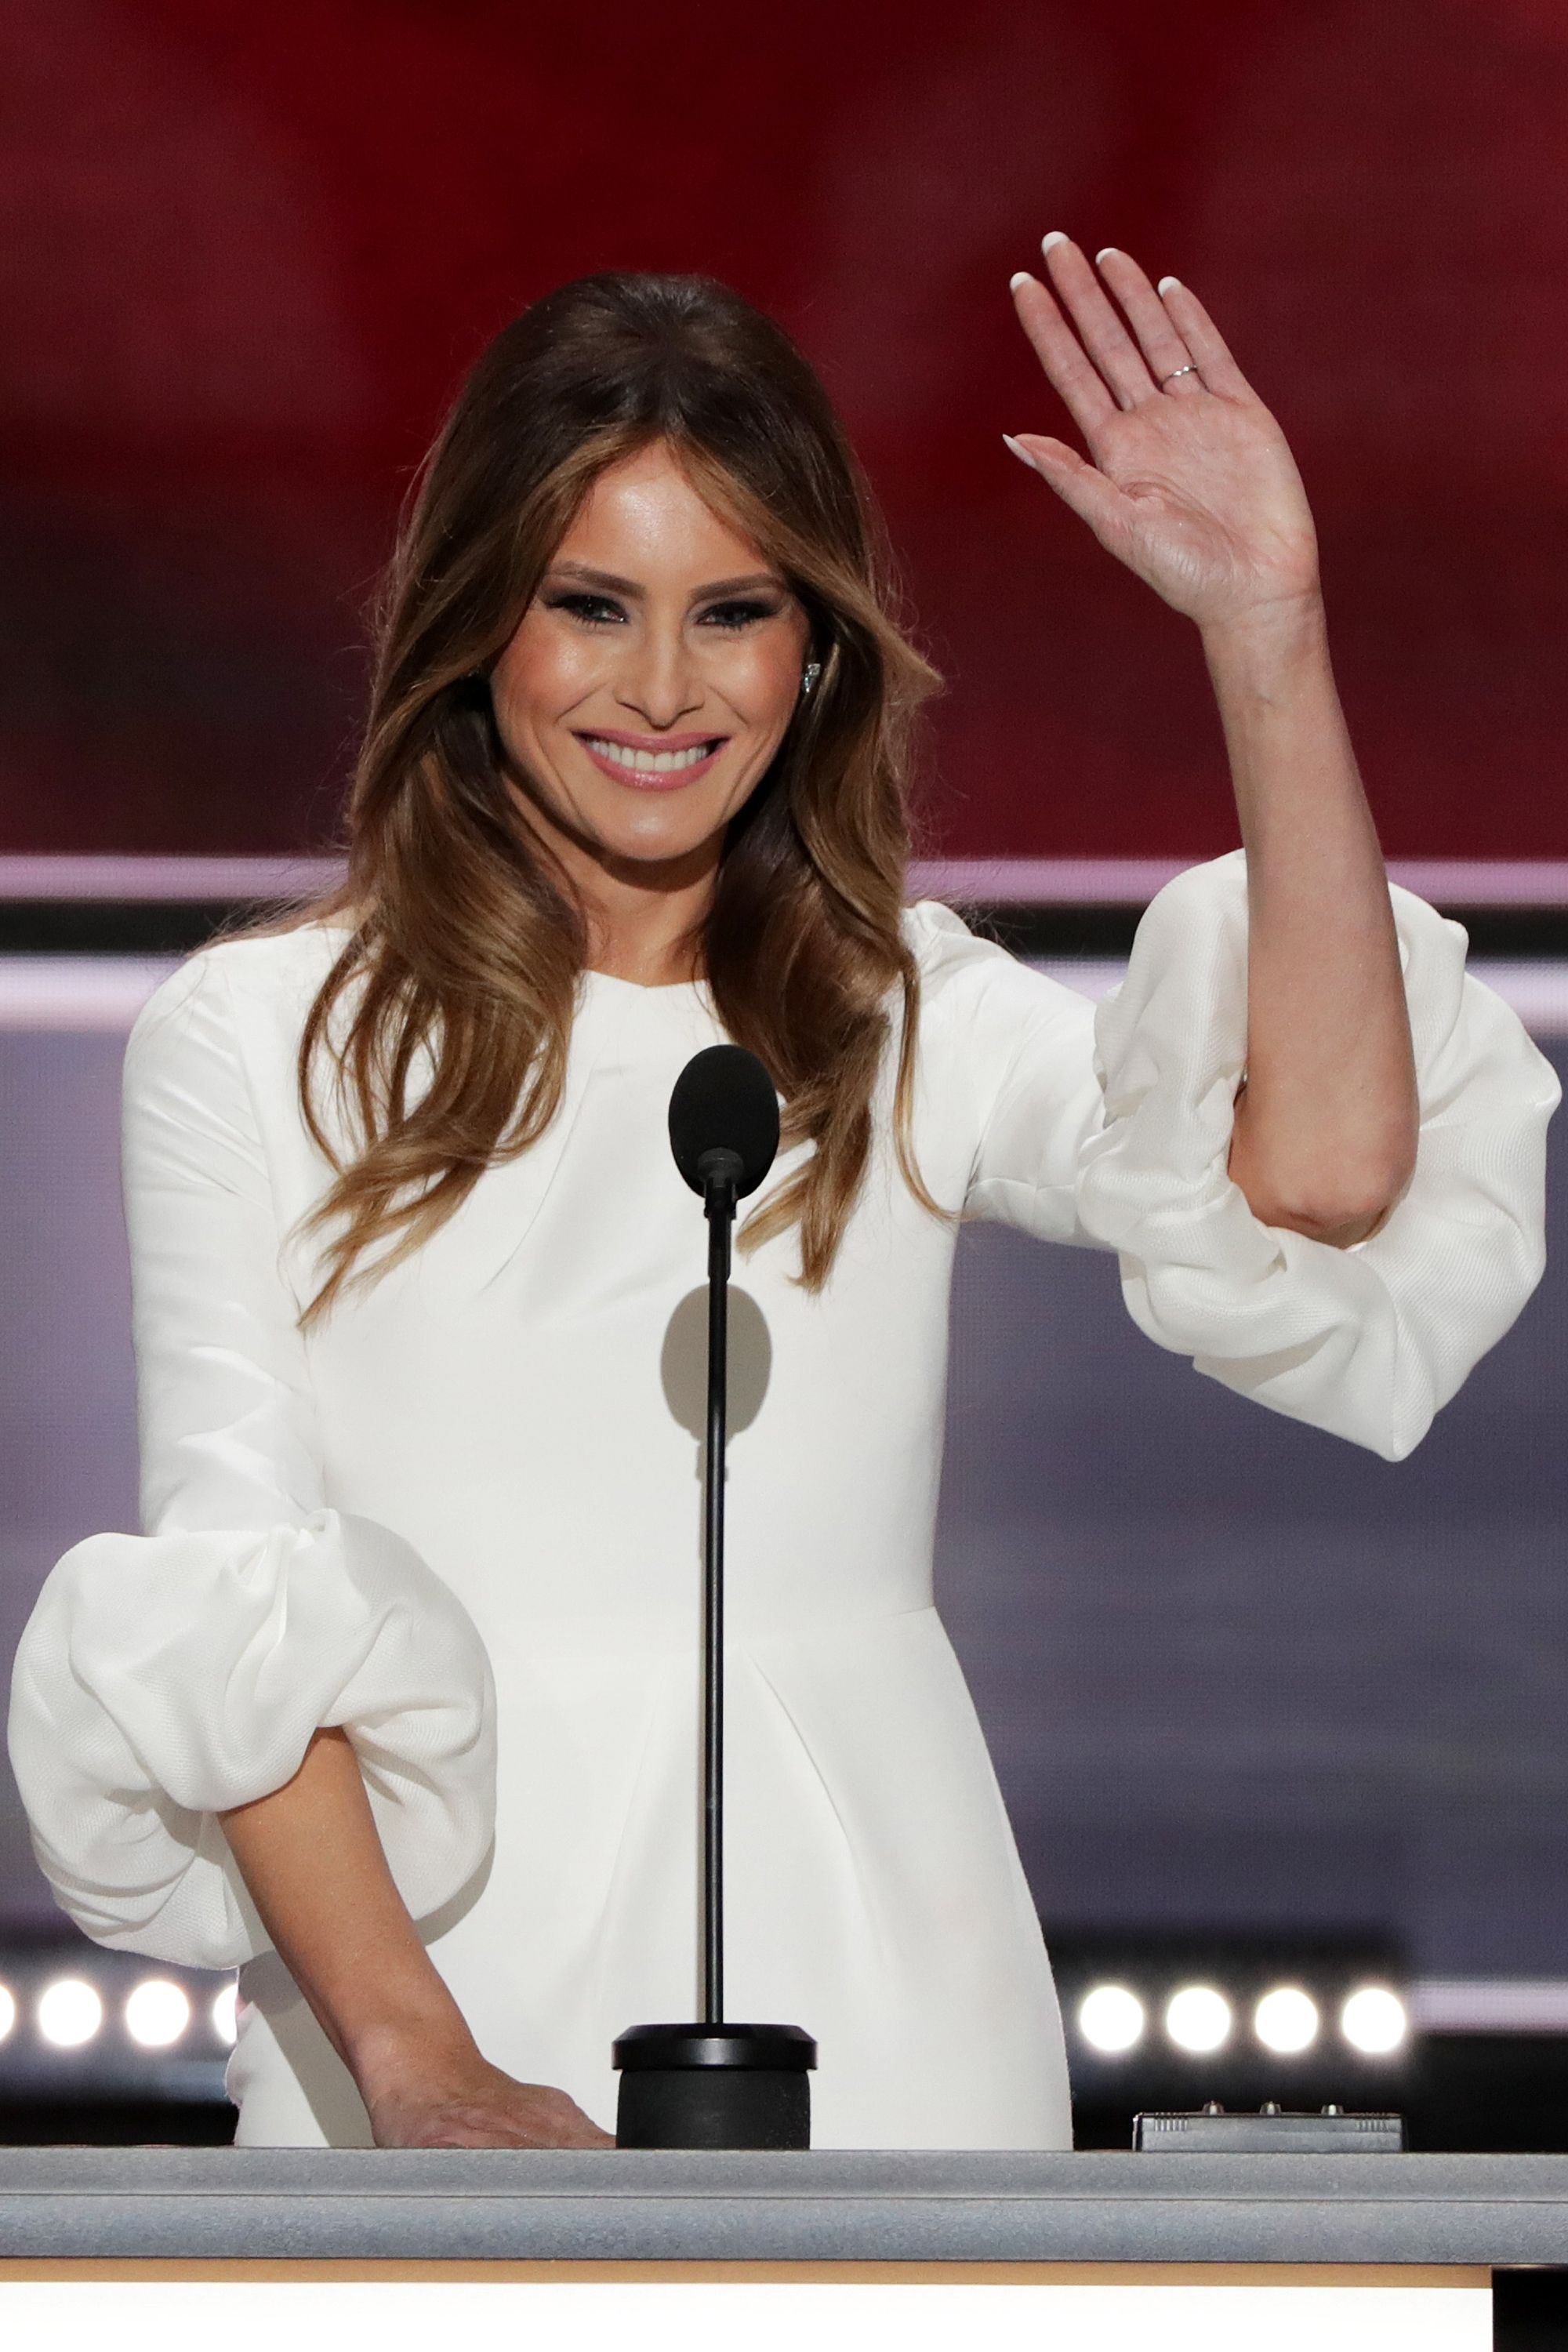 did we pay more attention to melania trump’s style than we said we would?